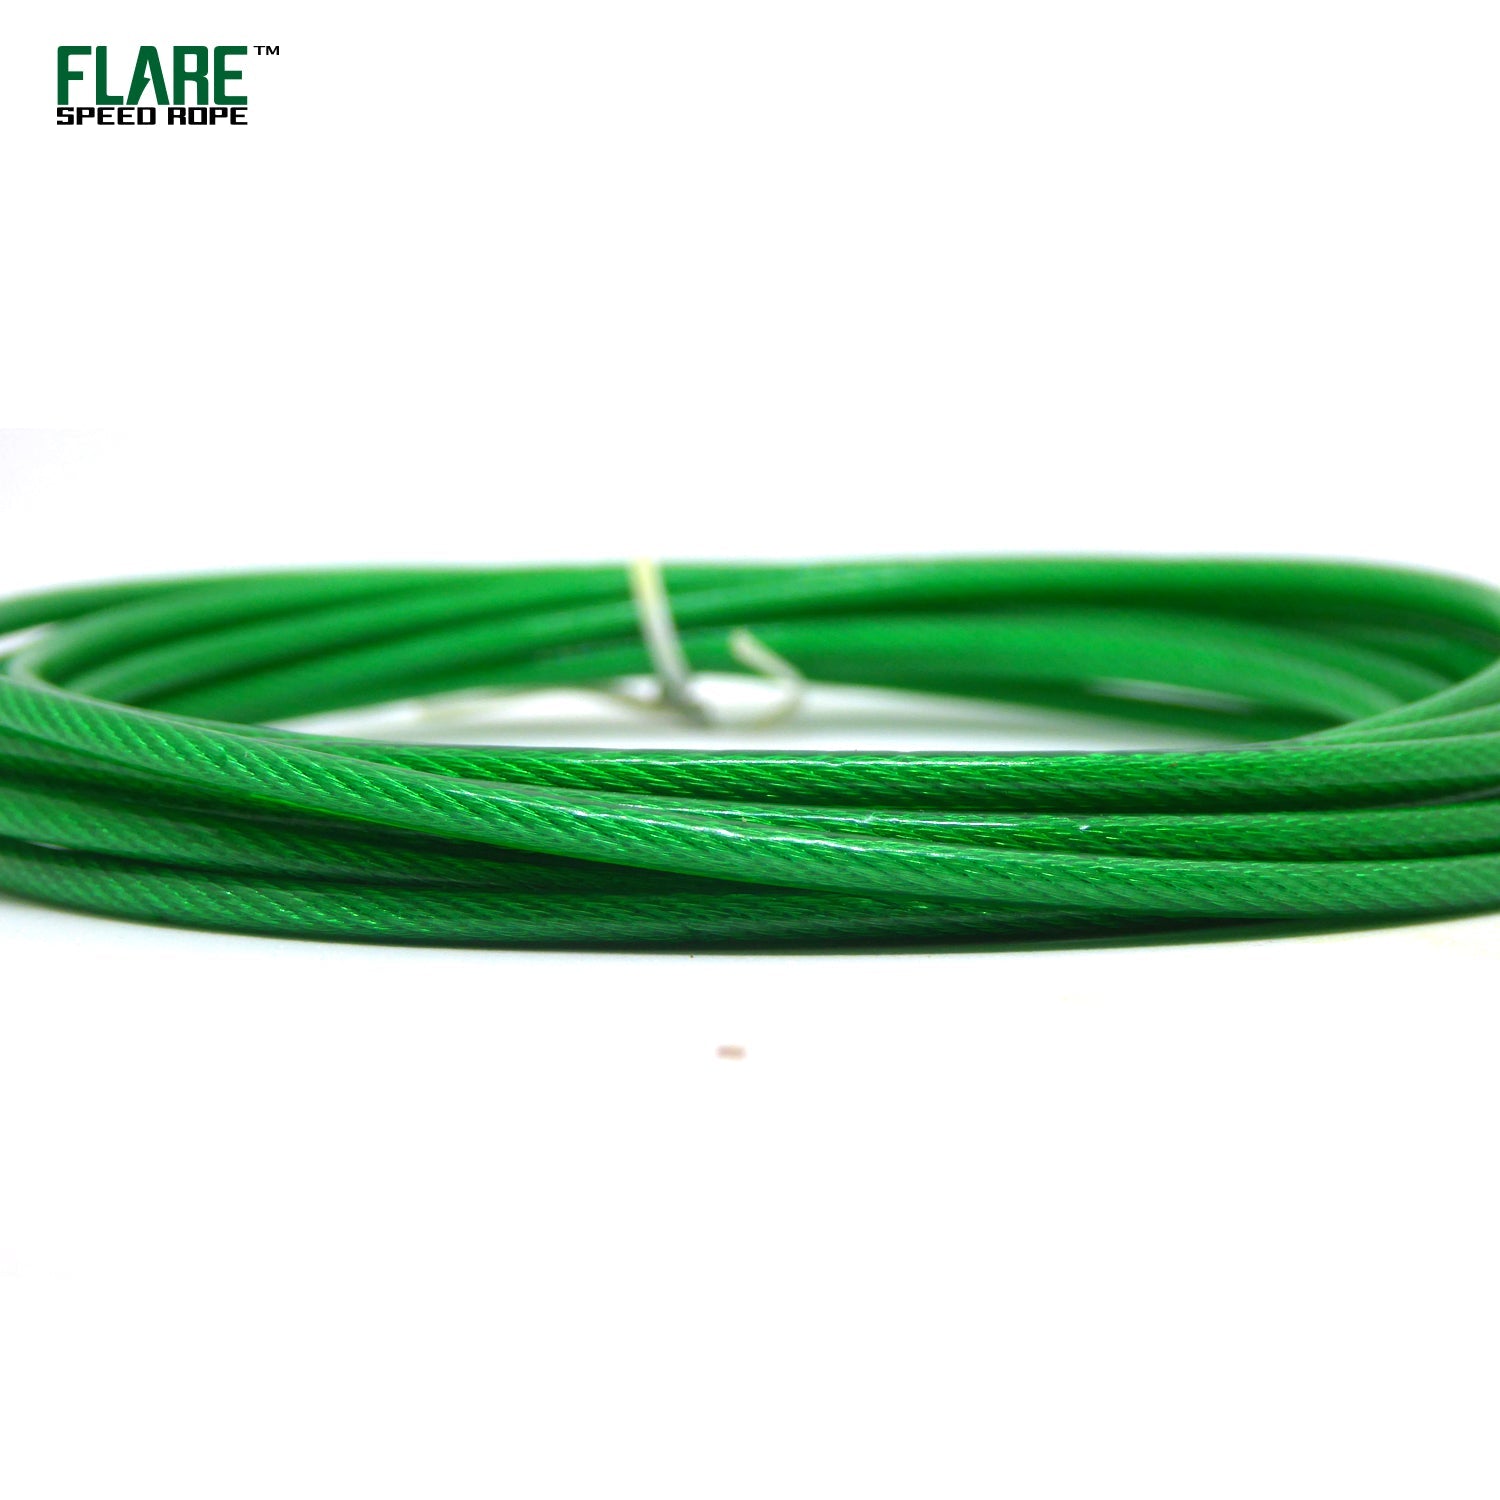 Flare replacement speed rope cables green pvc cable